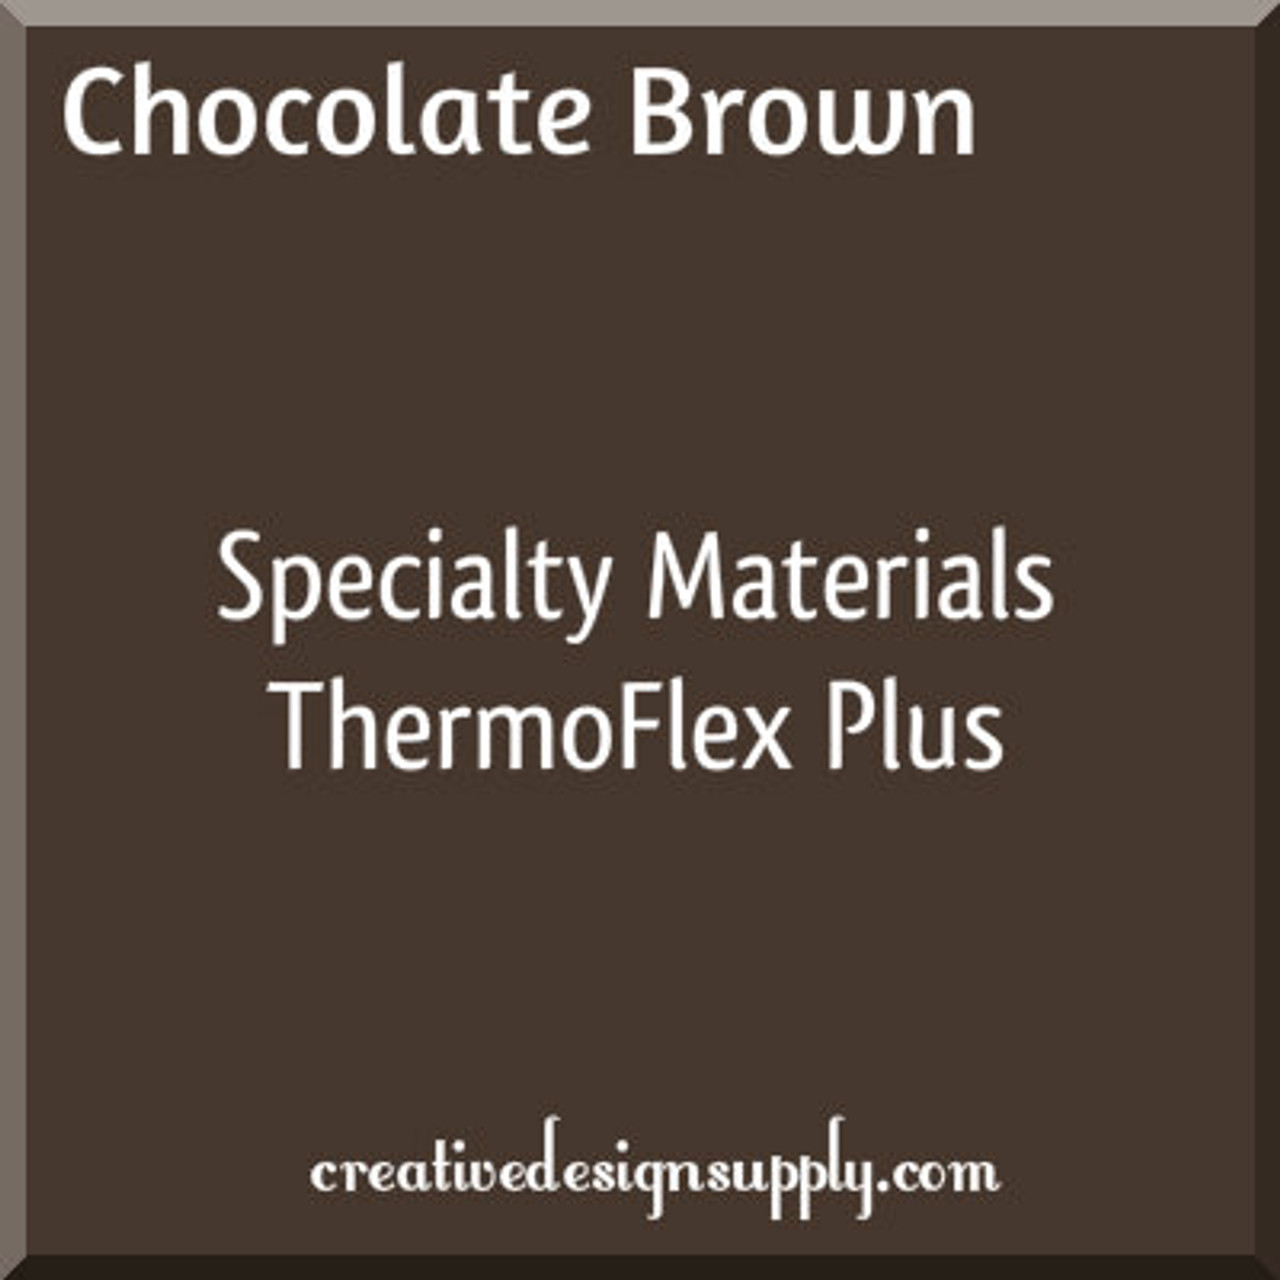 Specialty Materials™ ThermoFlex® Plus | Chocolate Brown